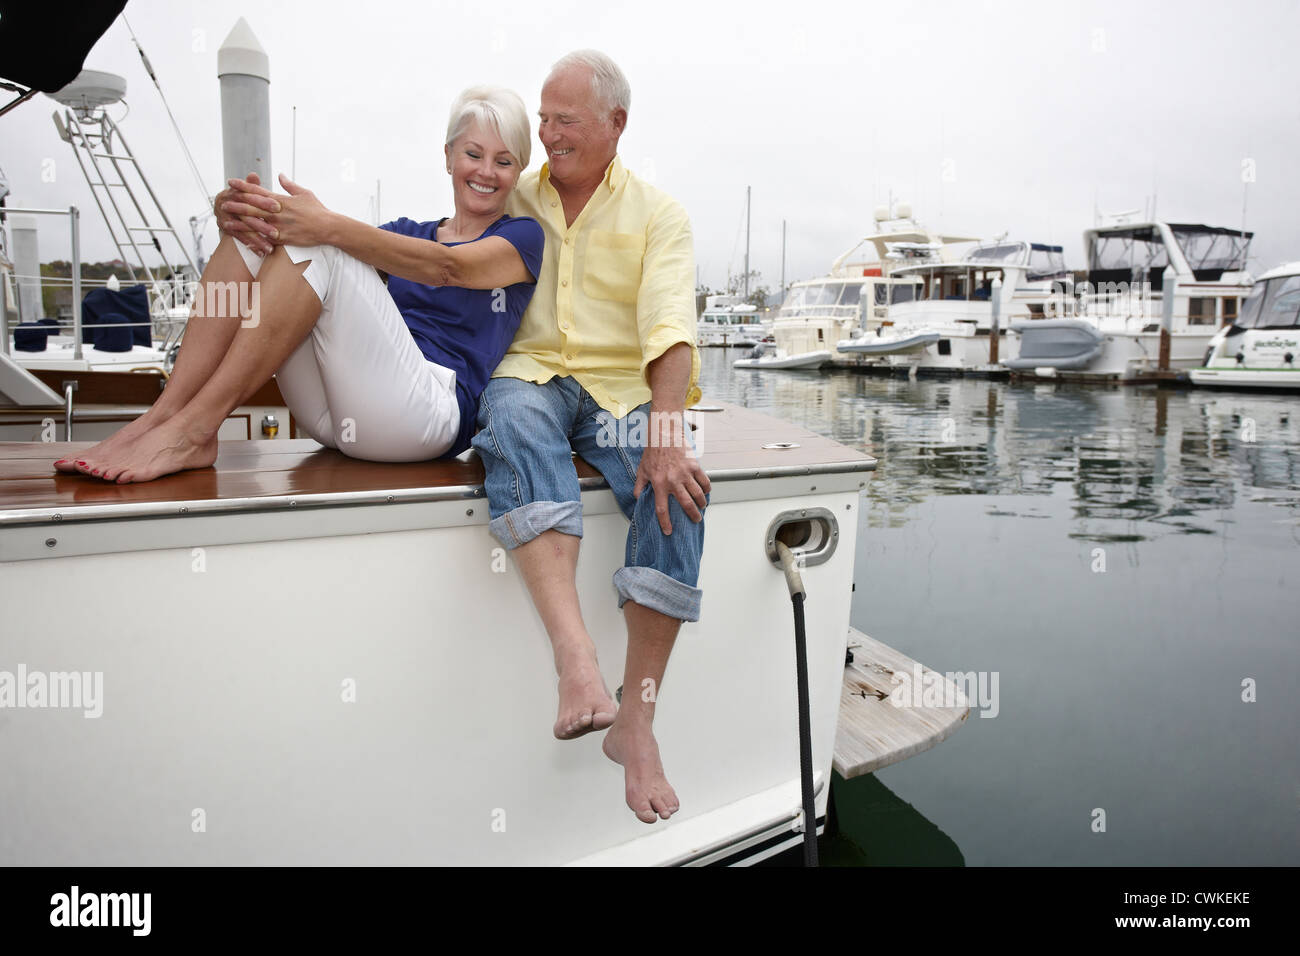 Couple relaxing on boat in marina Stock Photo